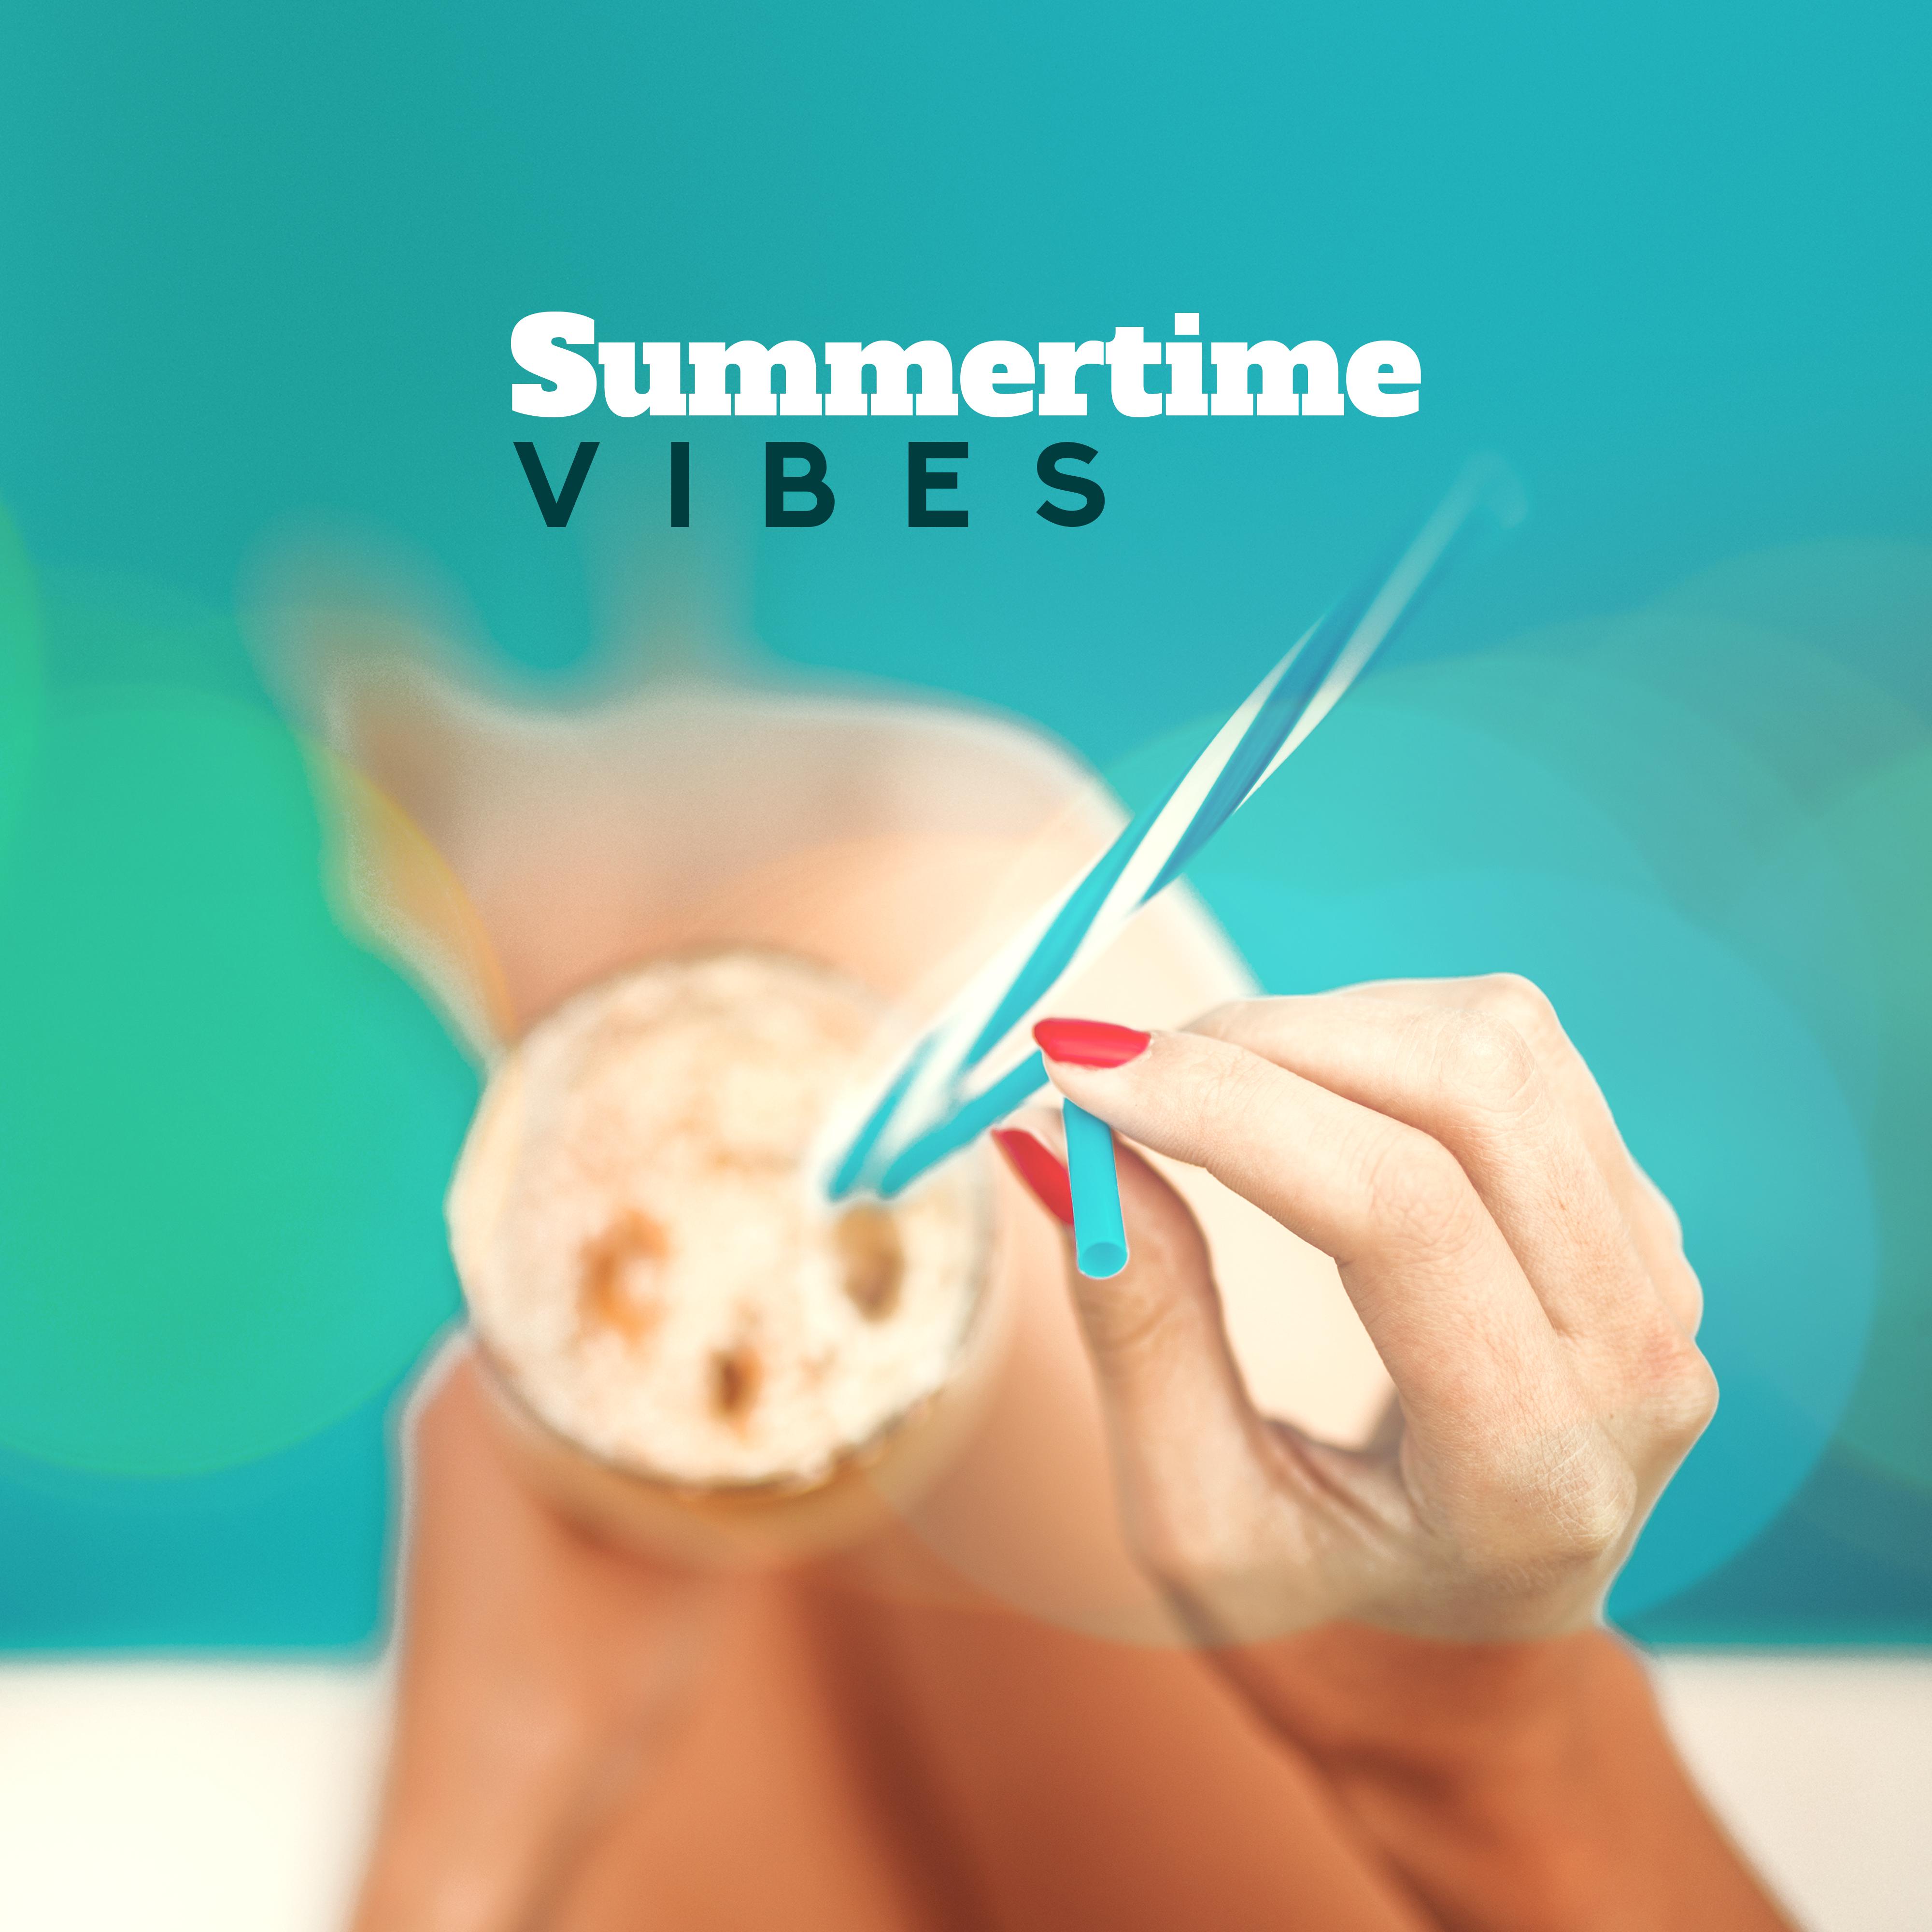 Summertime Vibes: Summer Chillout Music for the Beach and Holidays under Palm Trees 2019